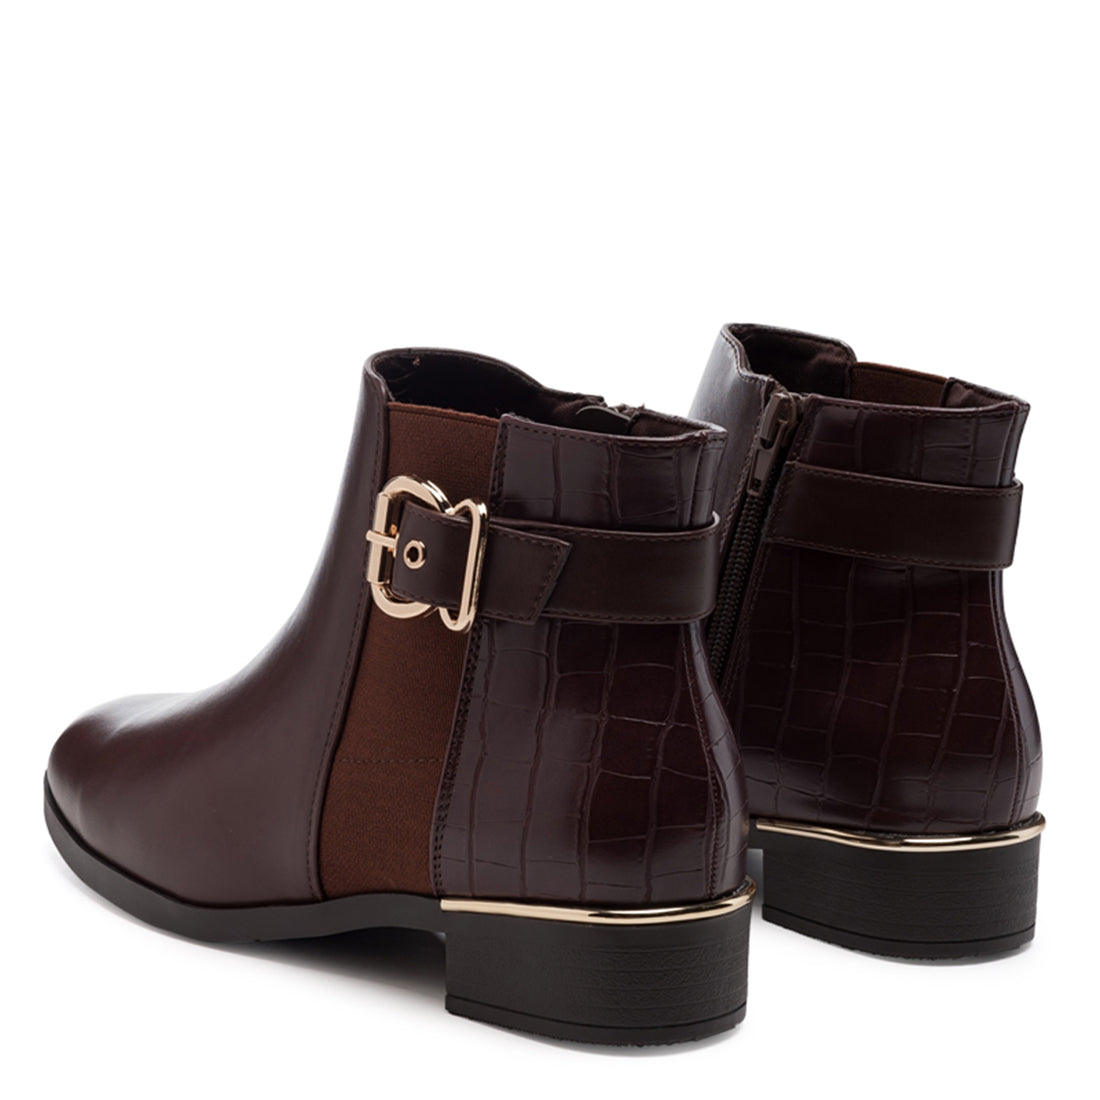 Buckled Ankle Boot with Croc Detail in Brown - UK4